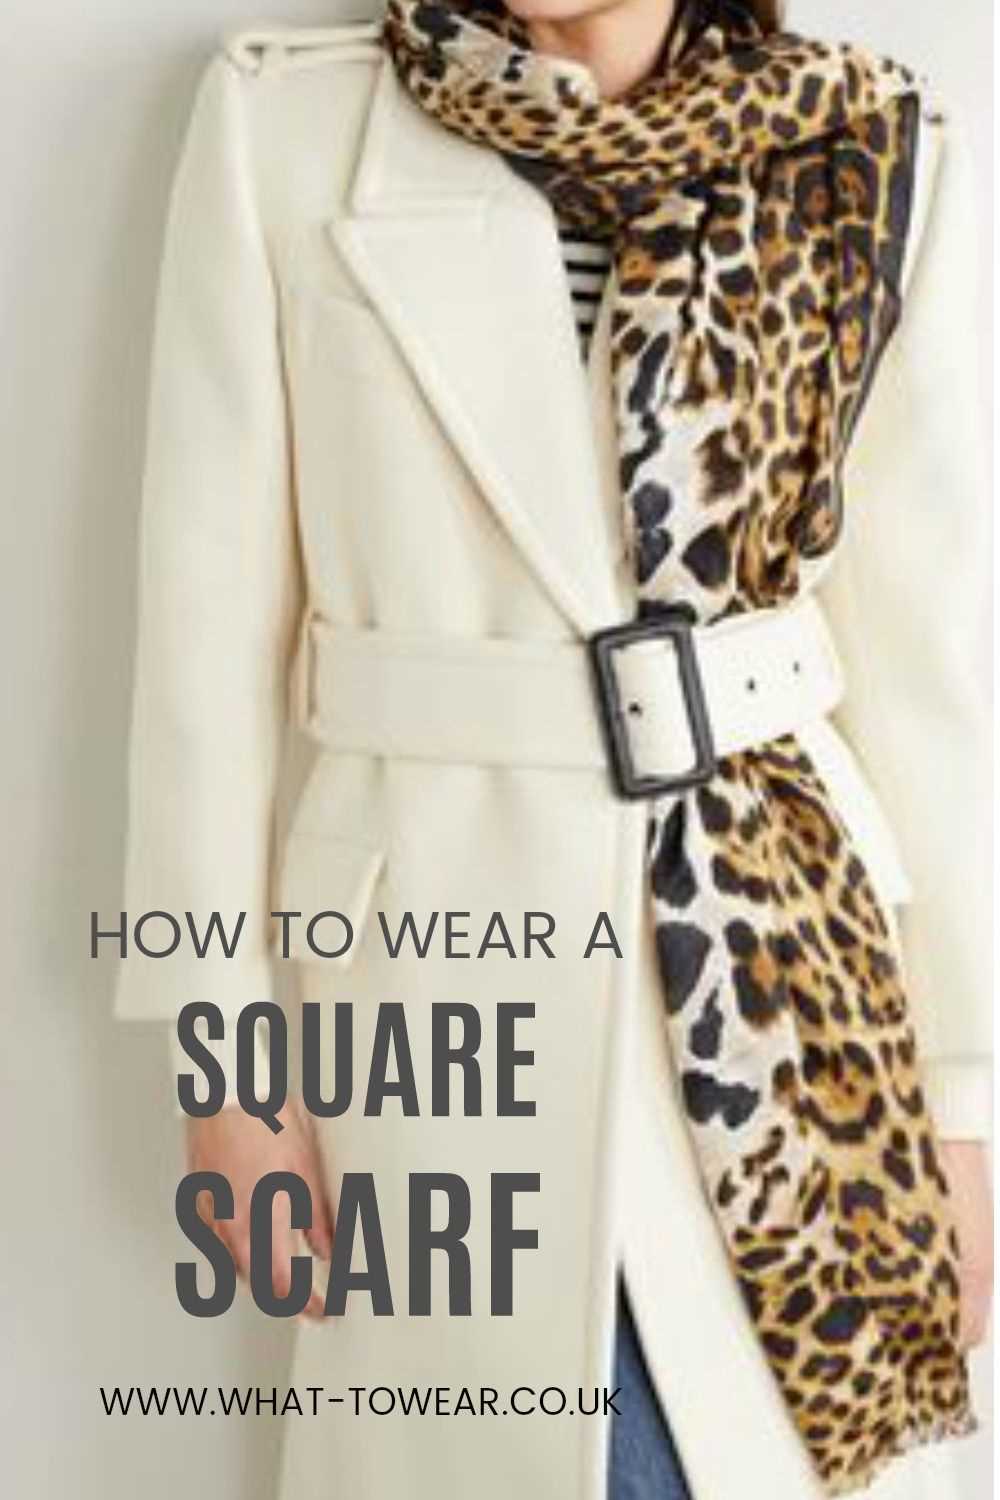 Adding a pop of color with a large square scarf